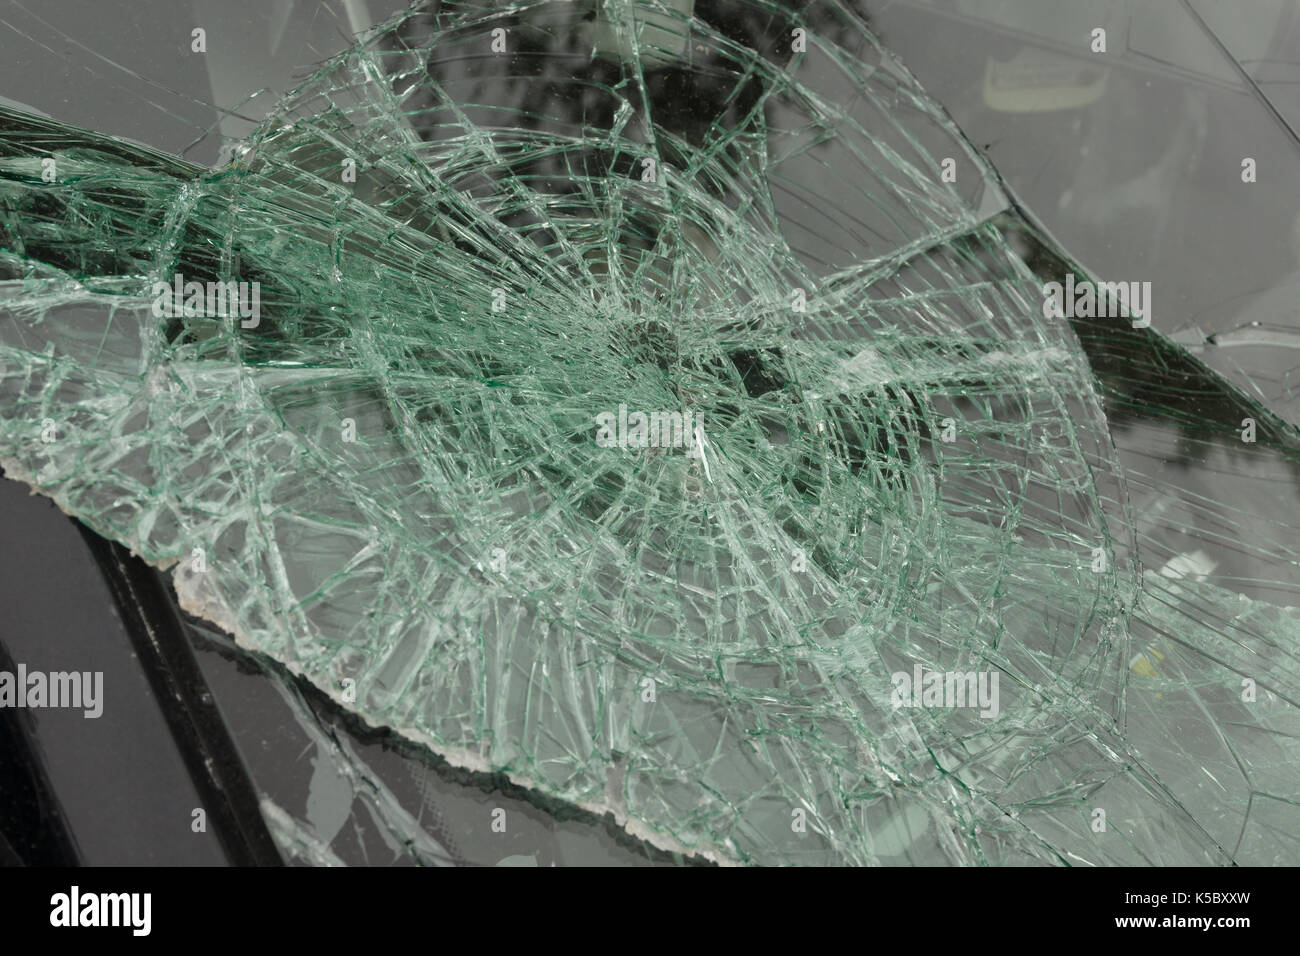 Smashed windscreen or windshield on a car in close up ideal for vehicle insurance claim or vandalism concepts Stock Photo